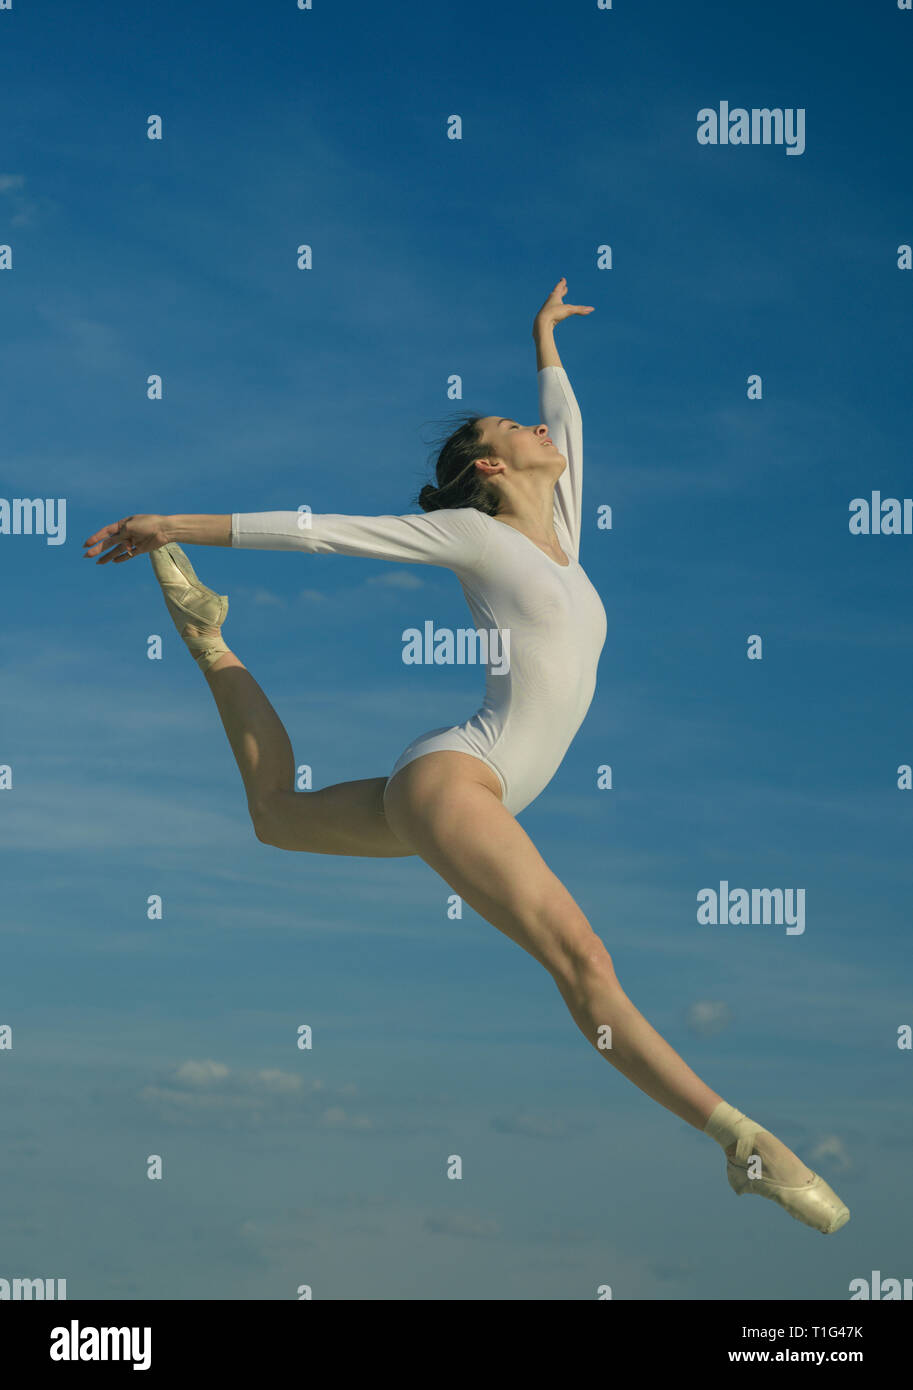 Grace and beauty. Classic dance style. Young ballerina jumping on blue sky. Cute ballet dancer. Pretty woman in dance wear. Practicing art of Stock Photo